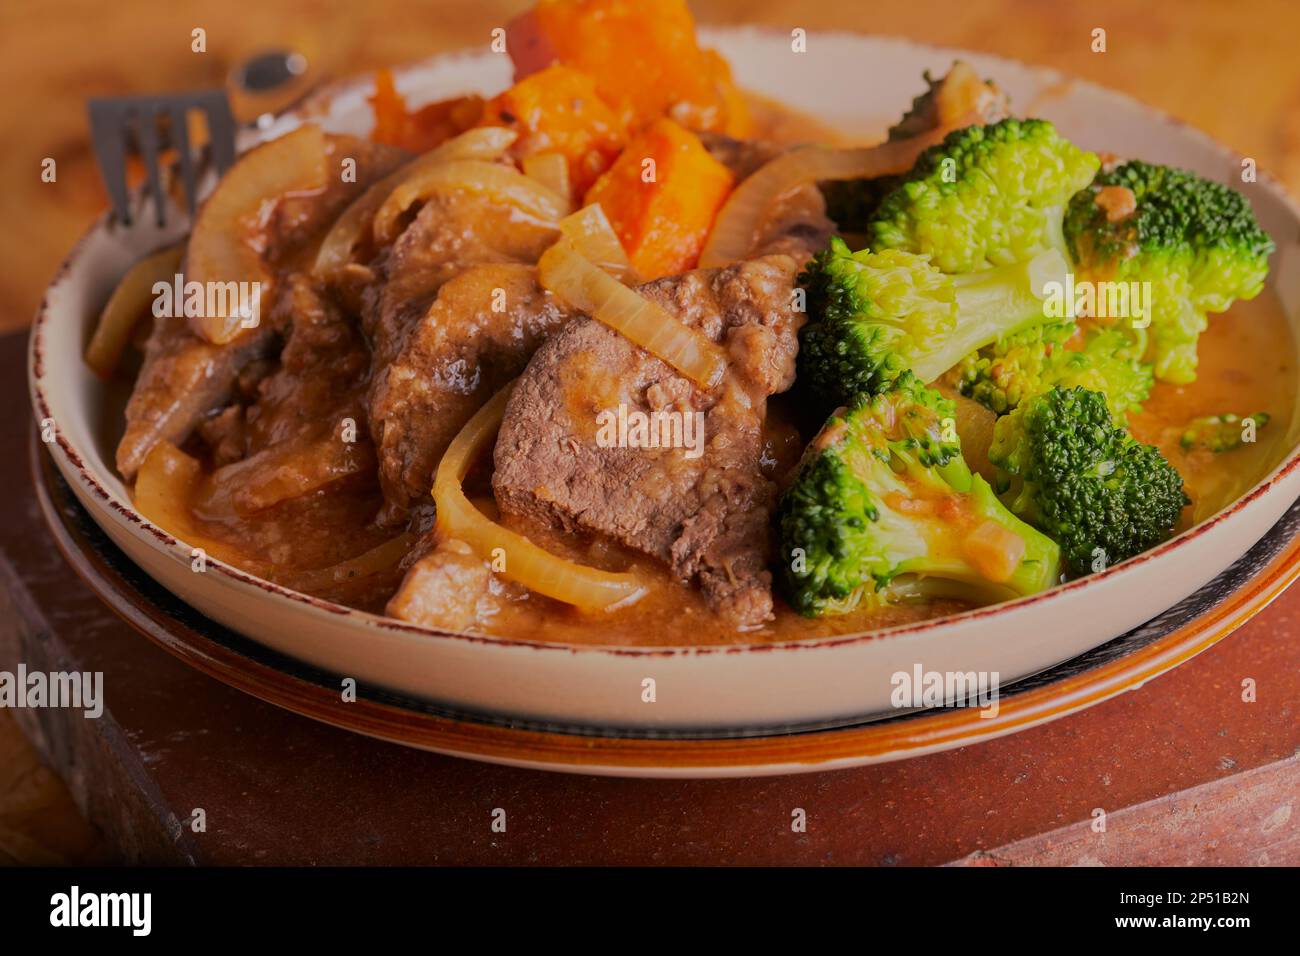 Liver and onion dinner with sweet potatoes and vegetables covered in a beef gravy. Stock Photo